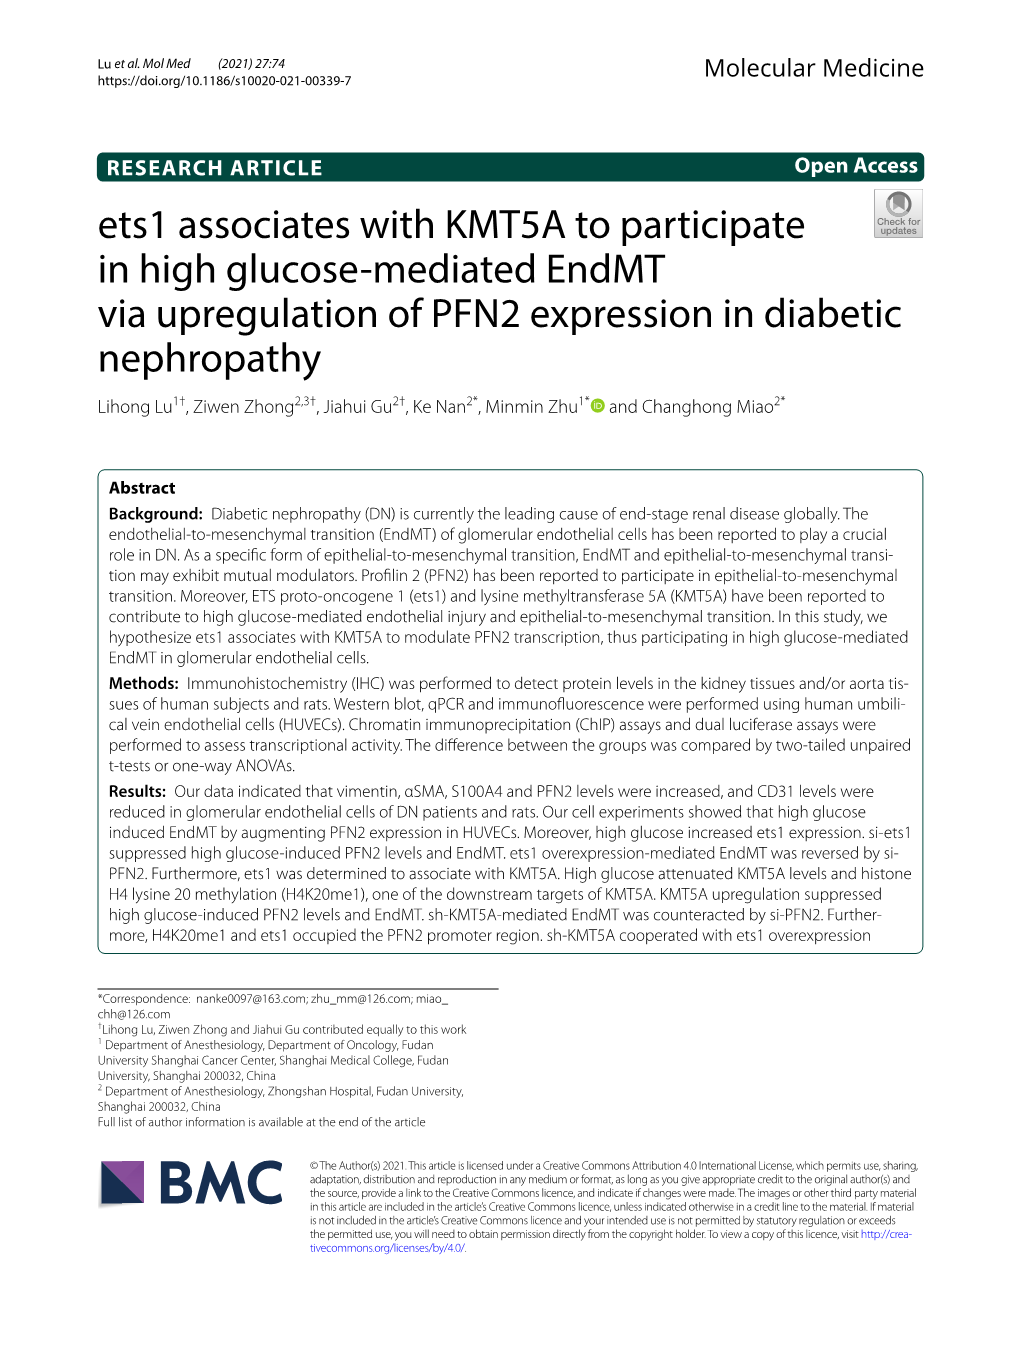 Ets1 Associates with KMT5A to Participate in High Glucose